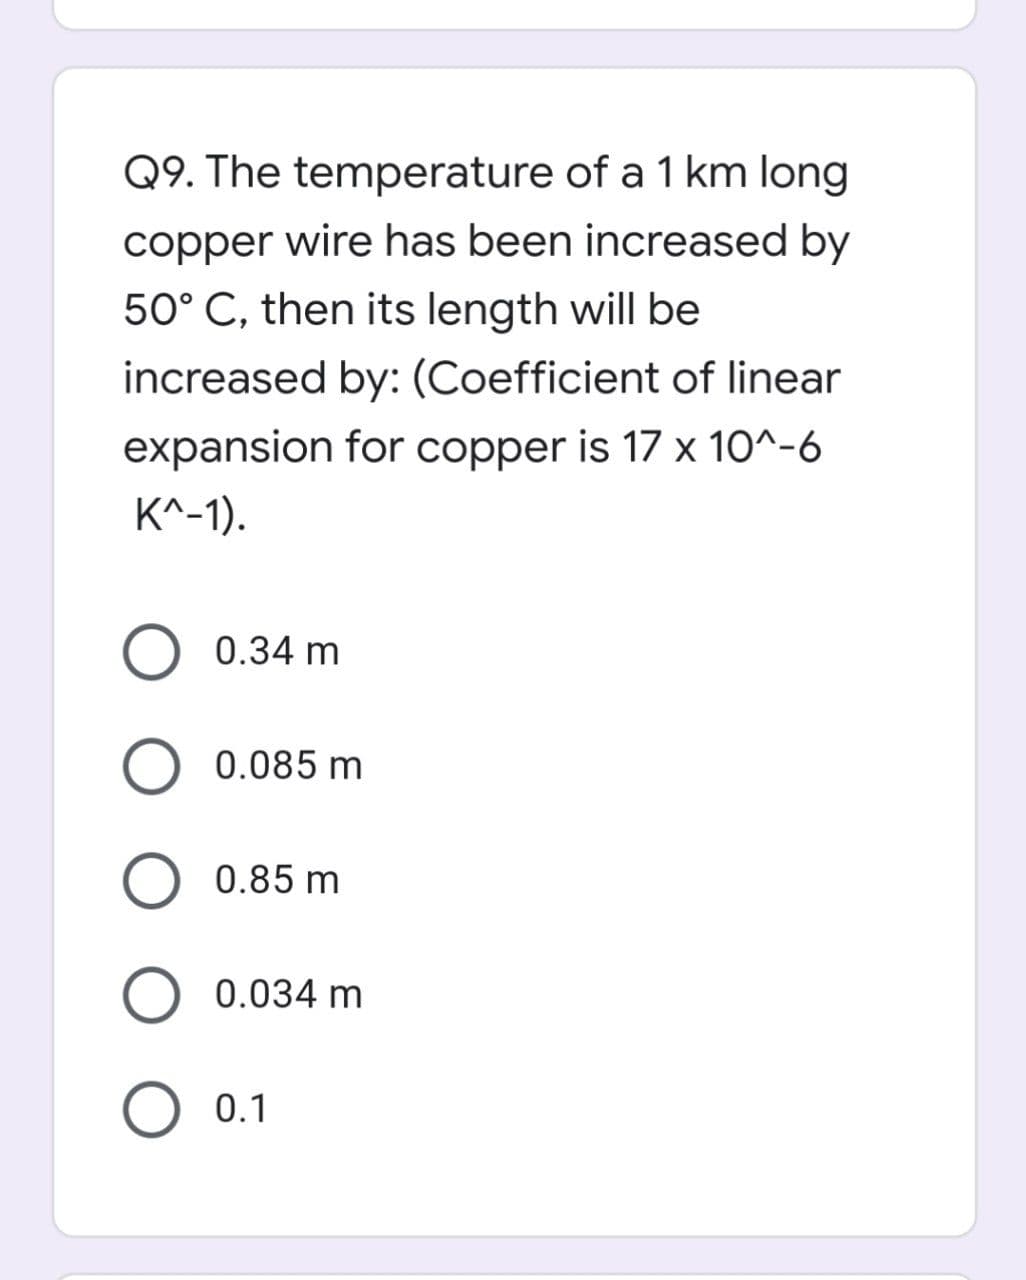 Q9. The temperature of a 1 km long
copper wire has been increased by
50° C, then its length will be
increased by: (Coefficient of linear
expansion for copper is 17 x 10^-6
K^-1).
0.34 m
O 0.085 m
0.85 m
O 0.034 m
O 0.1